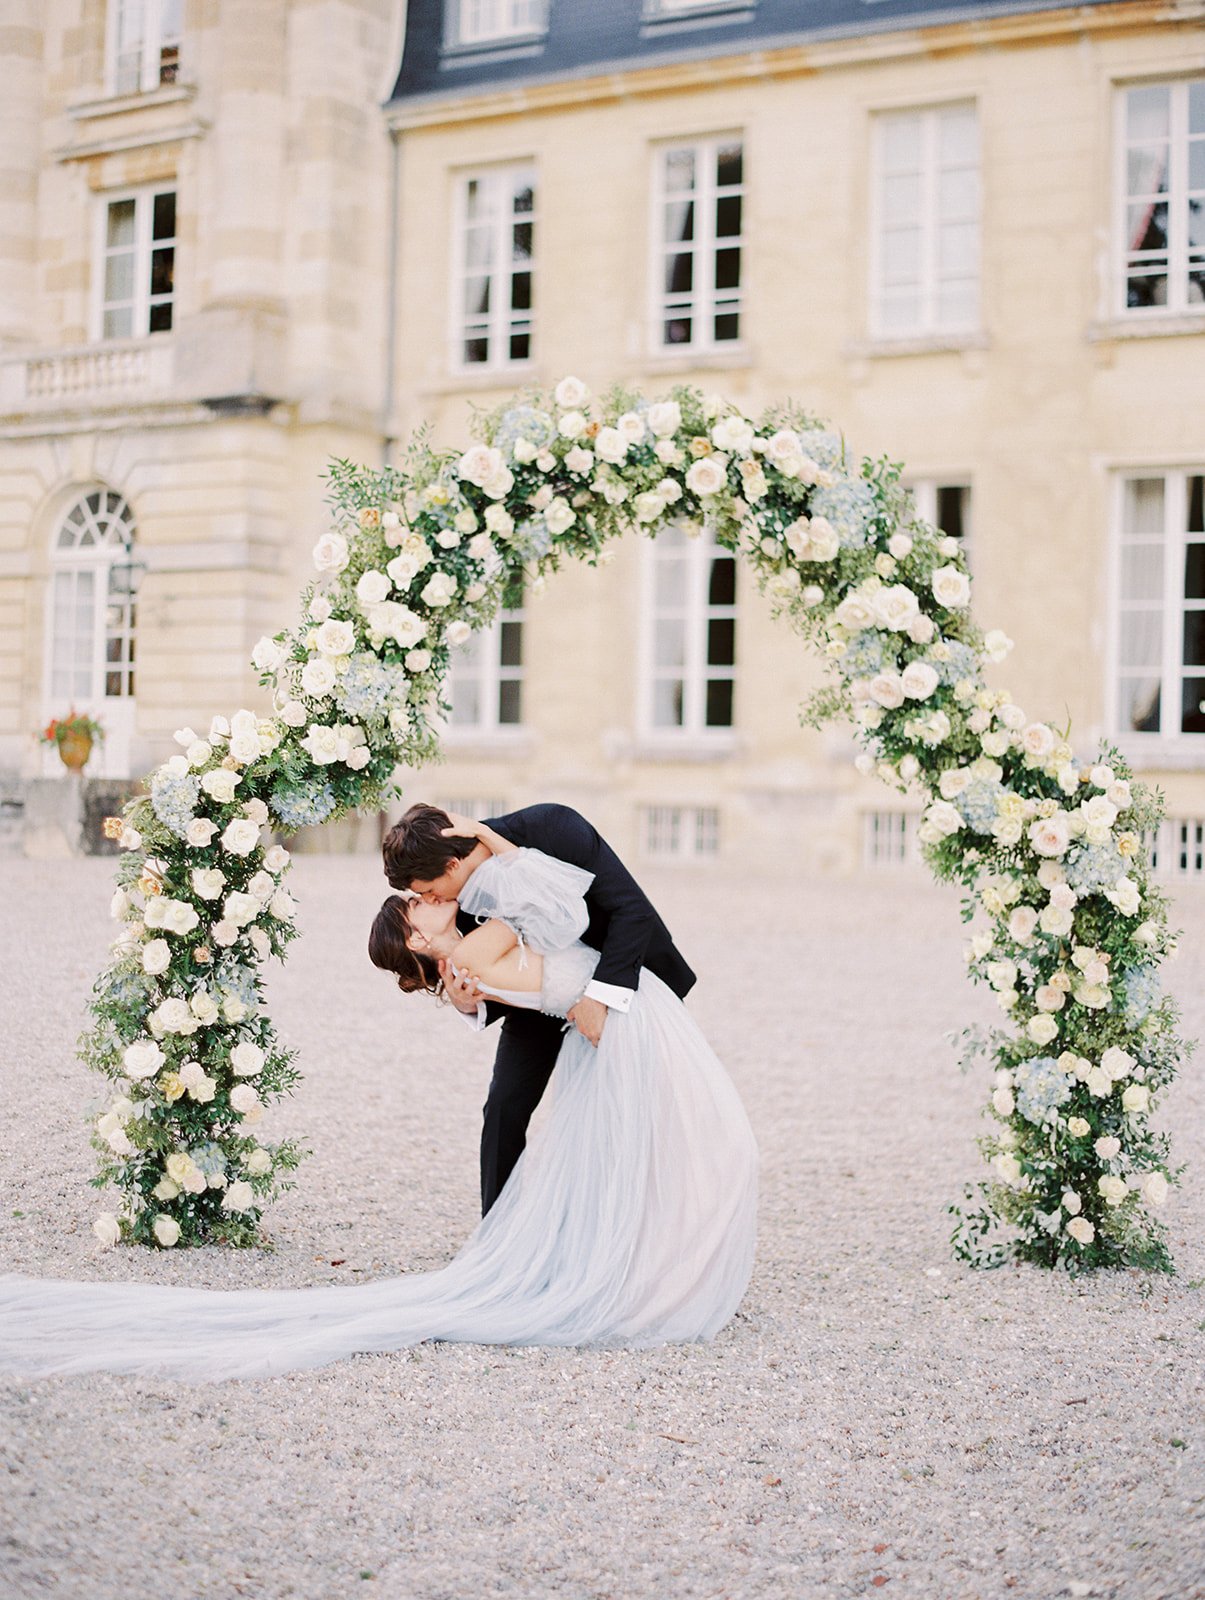 A bride and groom kissing under a floral arch in front of Chateau de Courtomer, a French chateau wedding venue near to Paris.